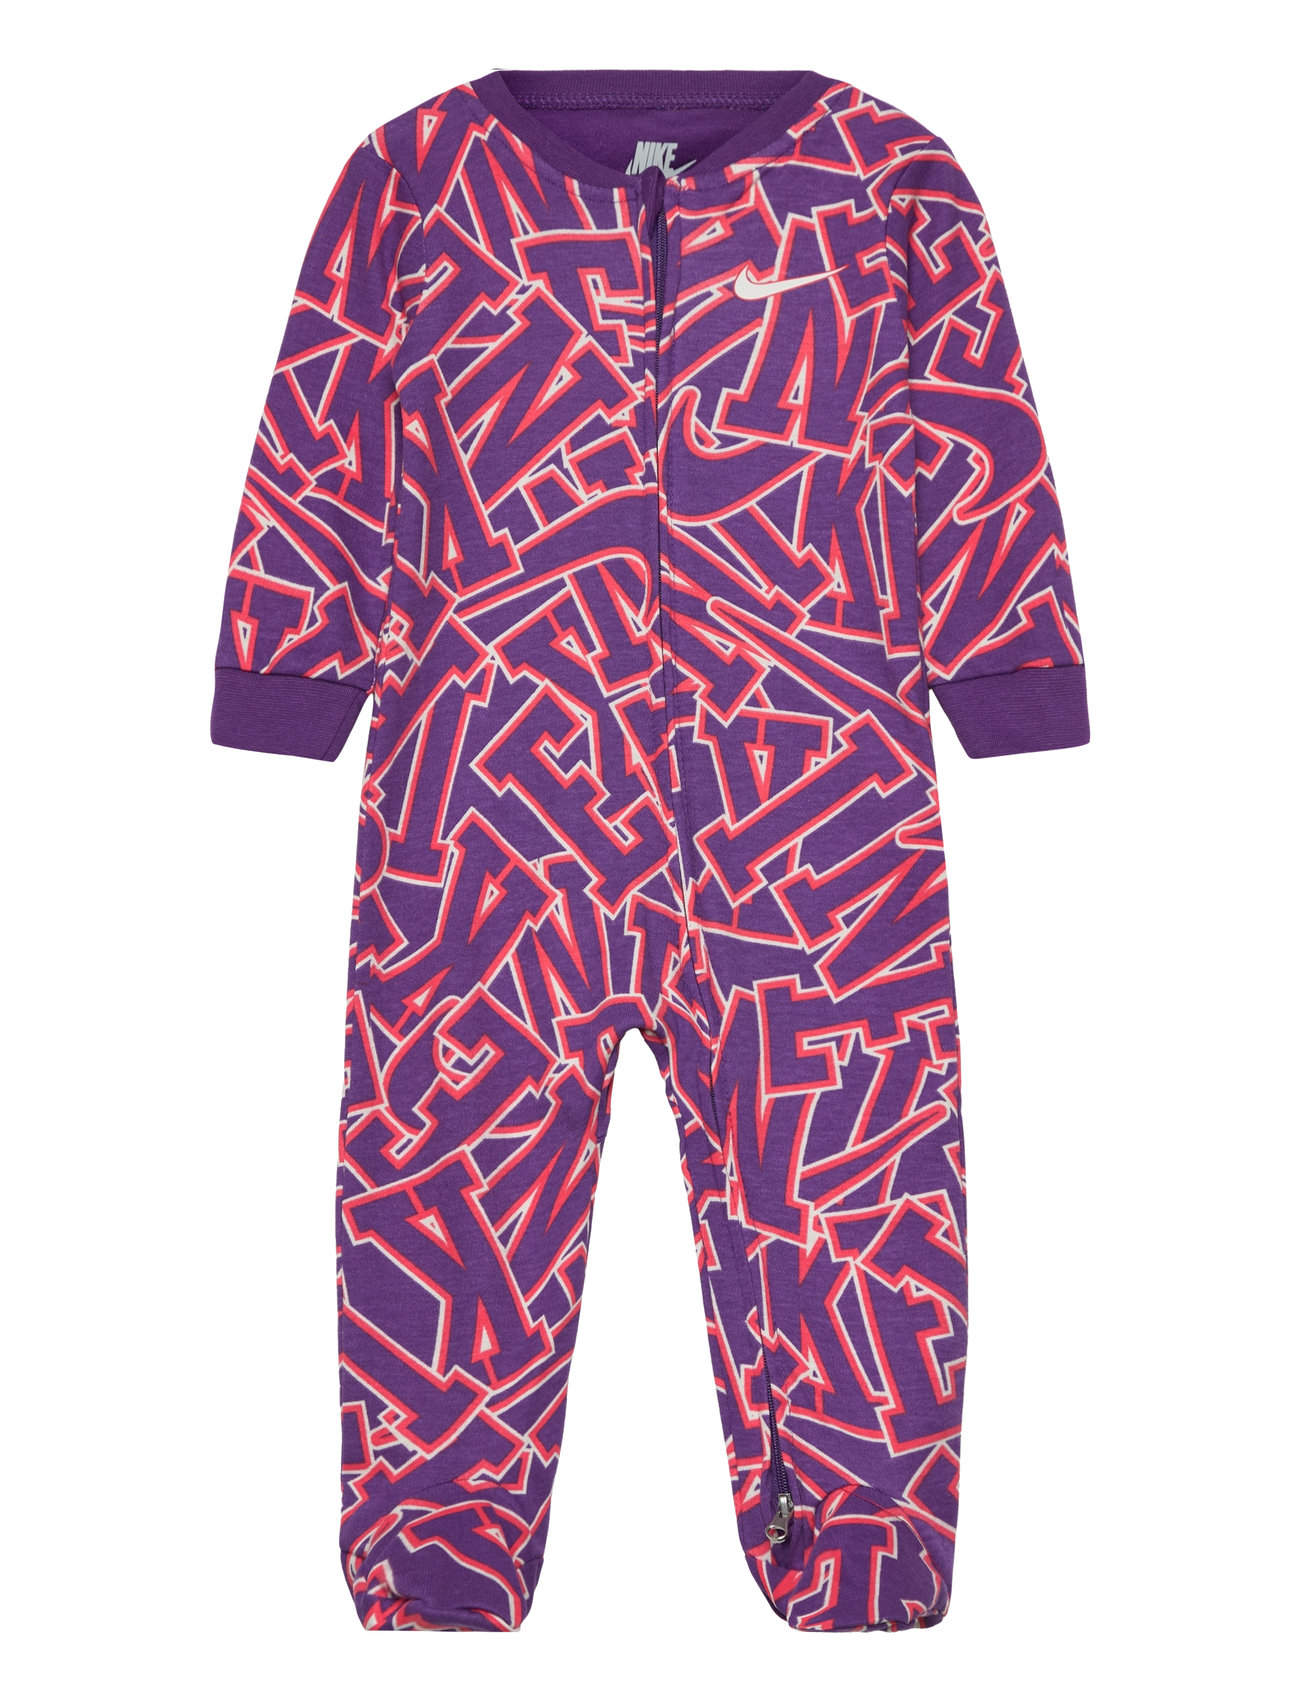 Join The Club Footed Coverall / Join The Club Footed Coveral Långärmad Bodysuit Purple Nike